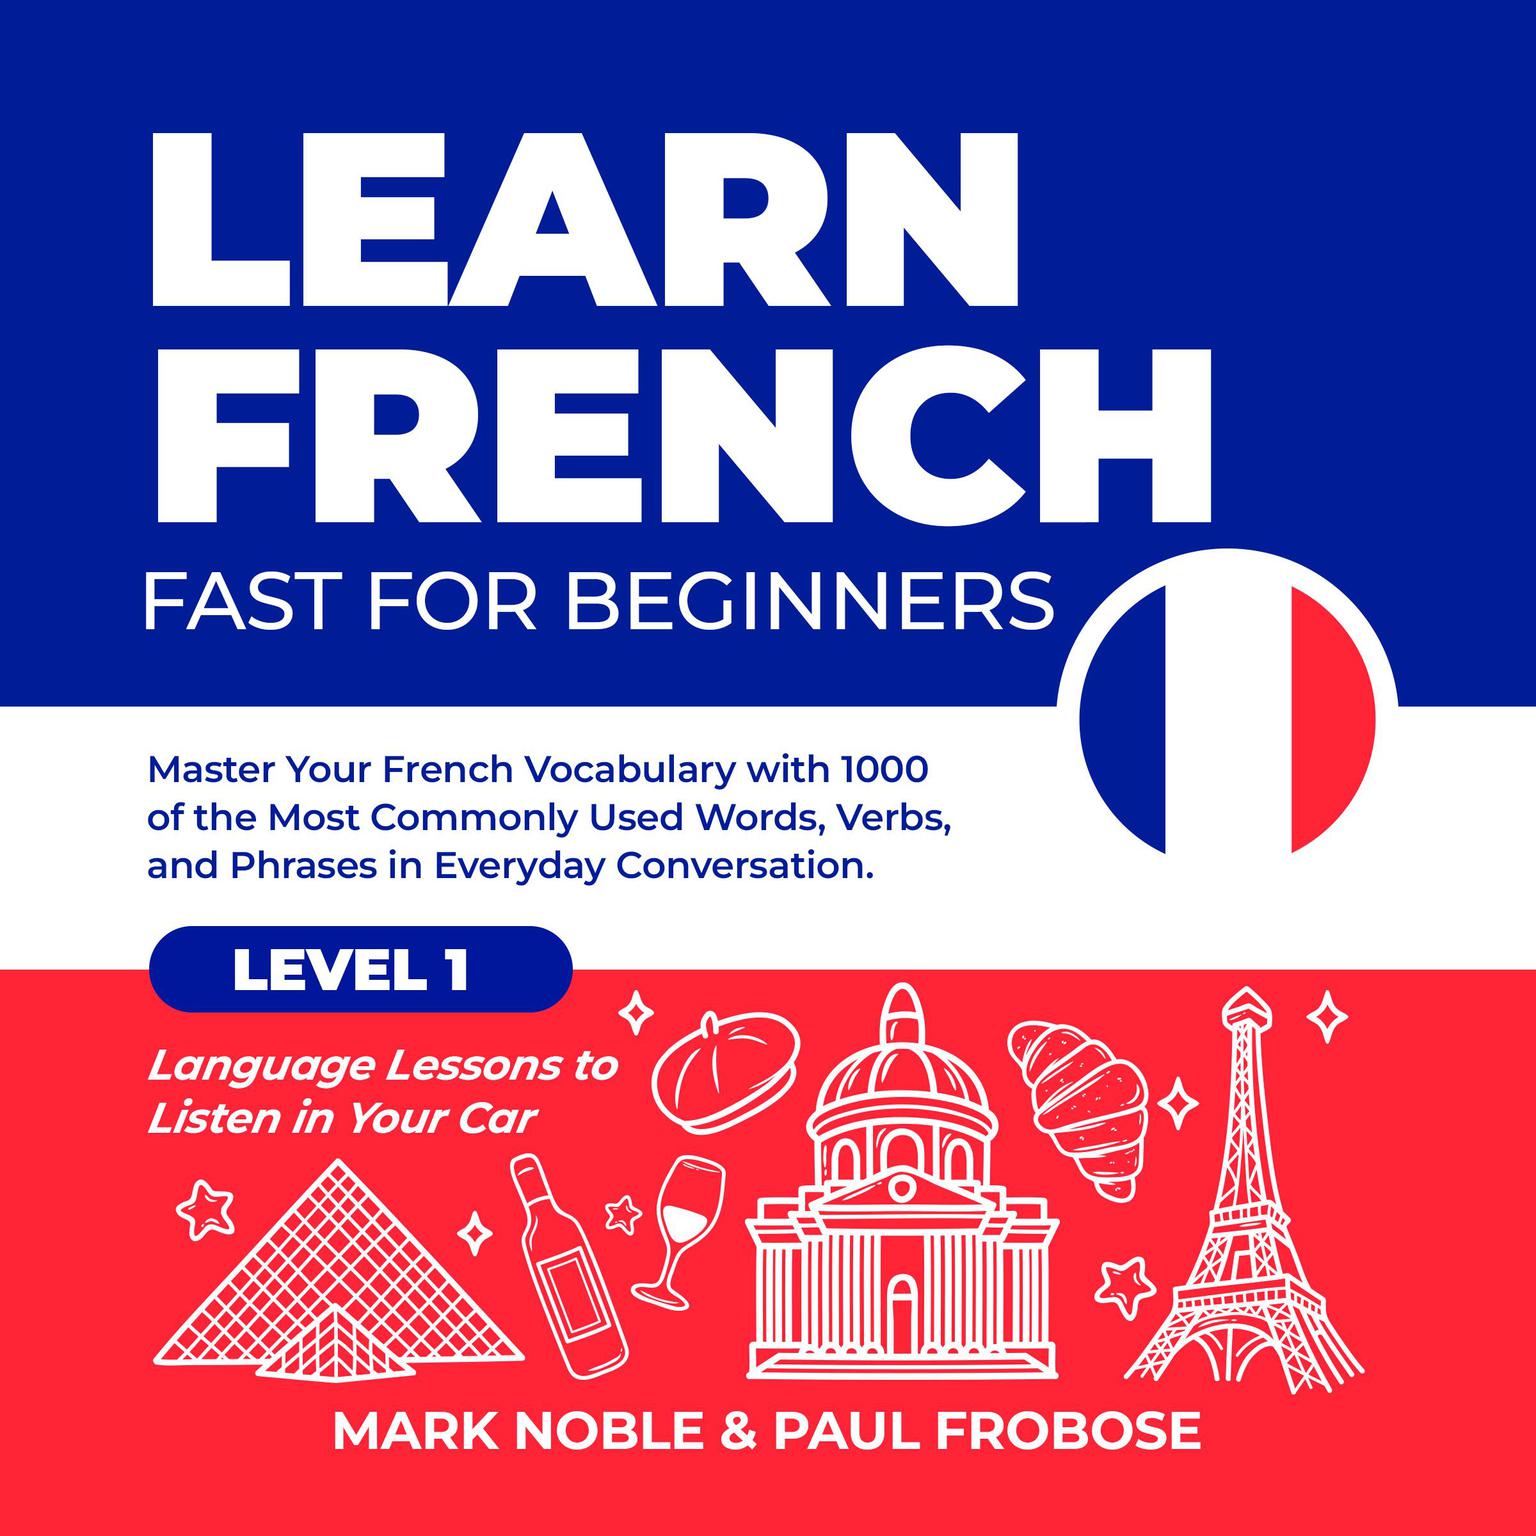 Learn French Fast for Beginners: Master Your French Vocabulary with 1000 of the Most Commonly Used Words, Verbs and Phrases in Everyday Conversation. Level 1 Language Lessons to Listen in Your Car Audiobook, by Mark Noble